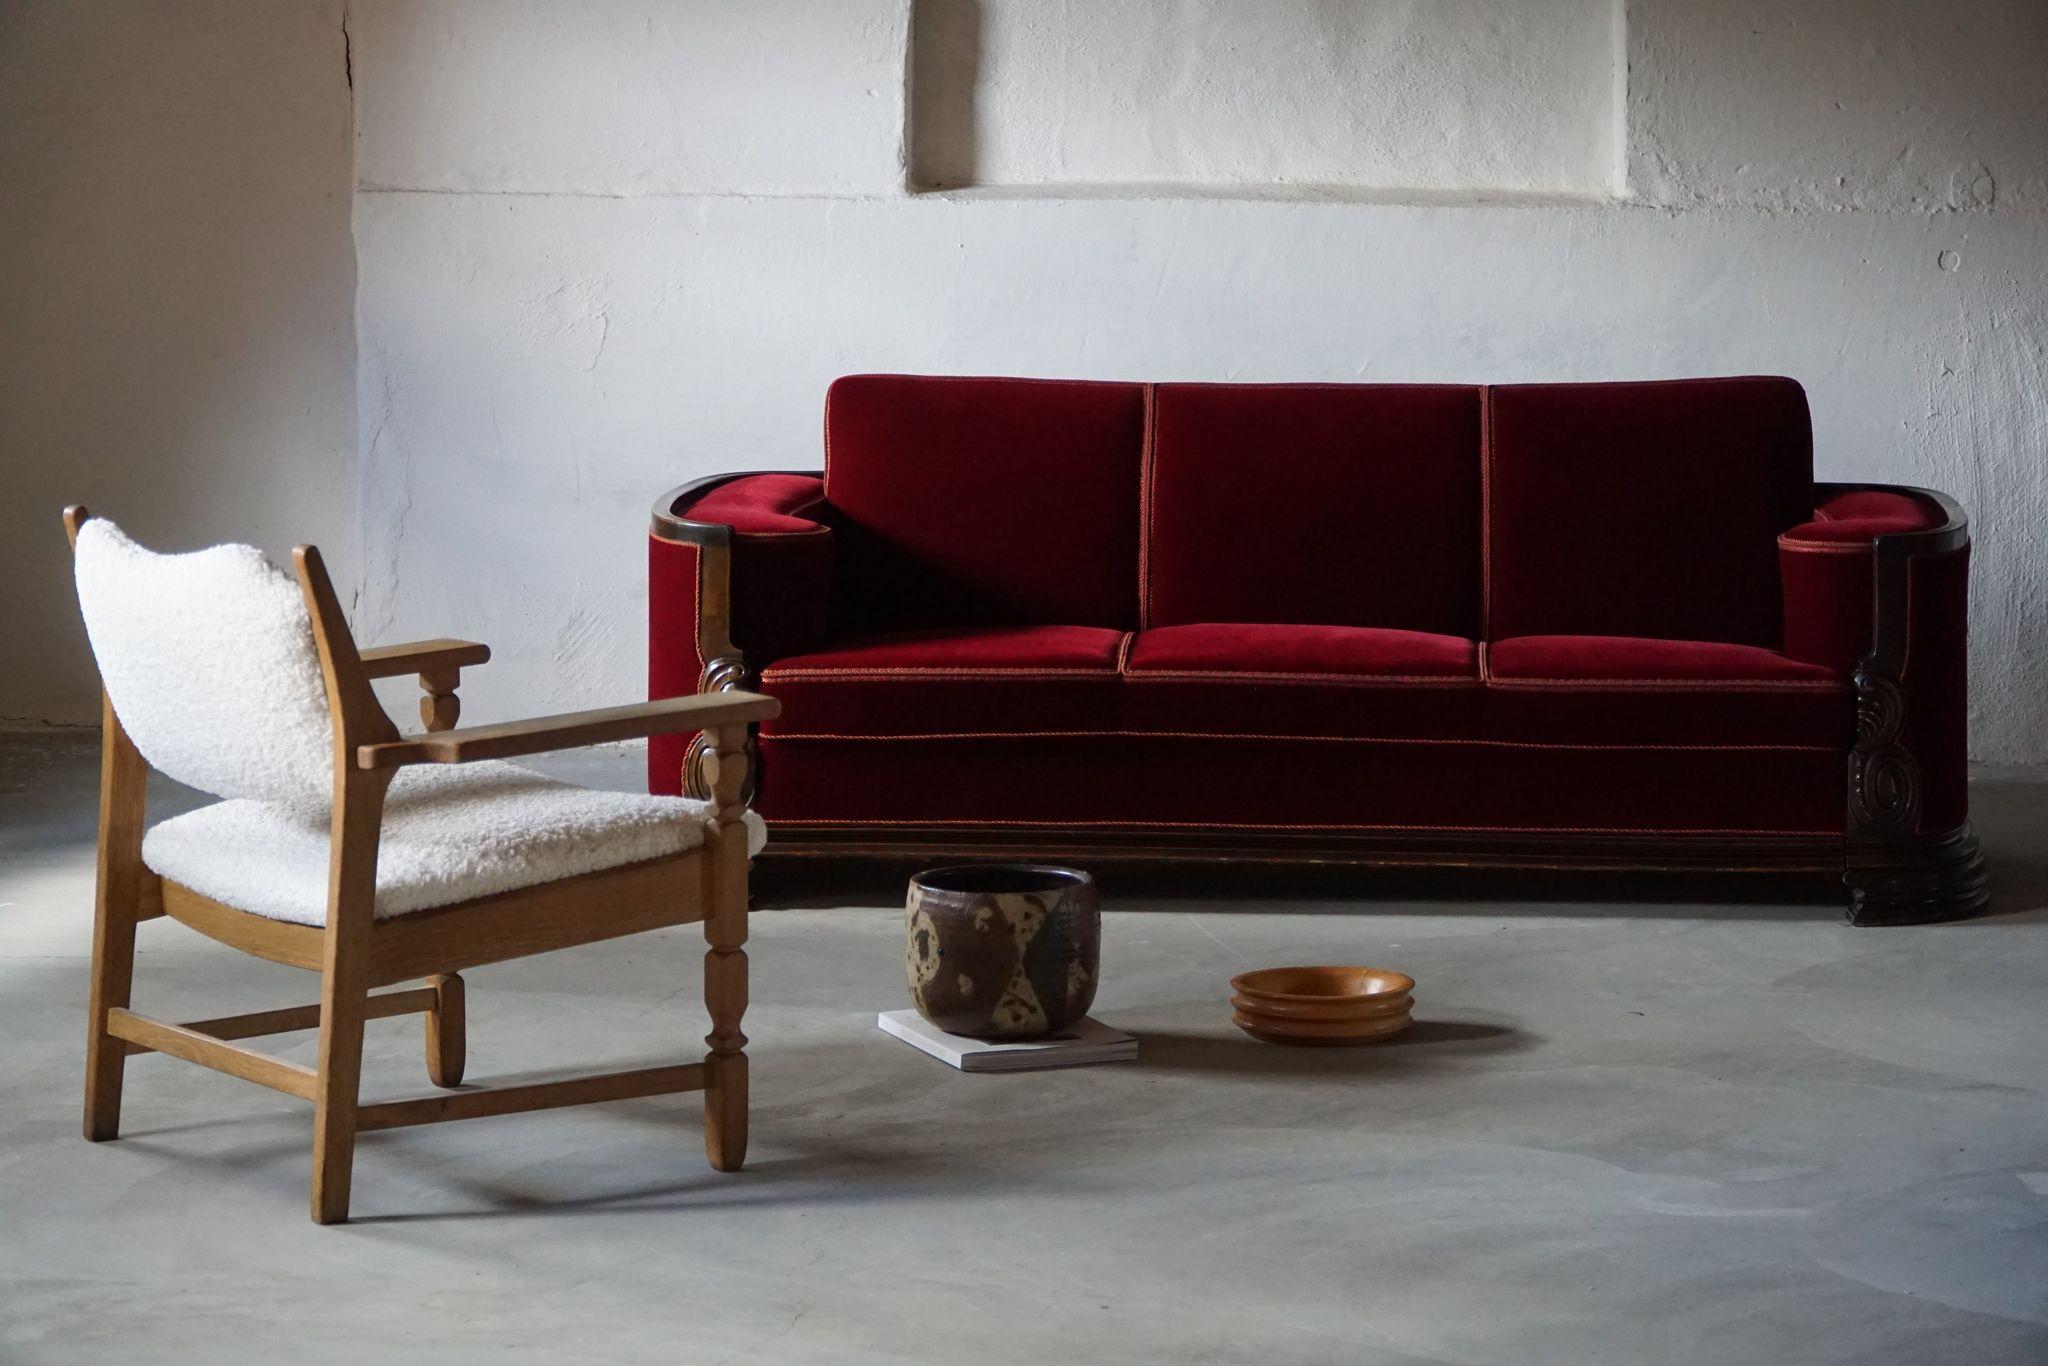 Such an elegant three seater antique empire sofa in a classic red velvet. Made by a Danish cabinetmaker in the early 19th century. The general impression of this vintage object is good. 

Beautiful curves that will complement many kinds of